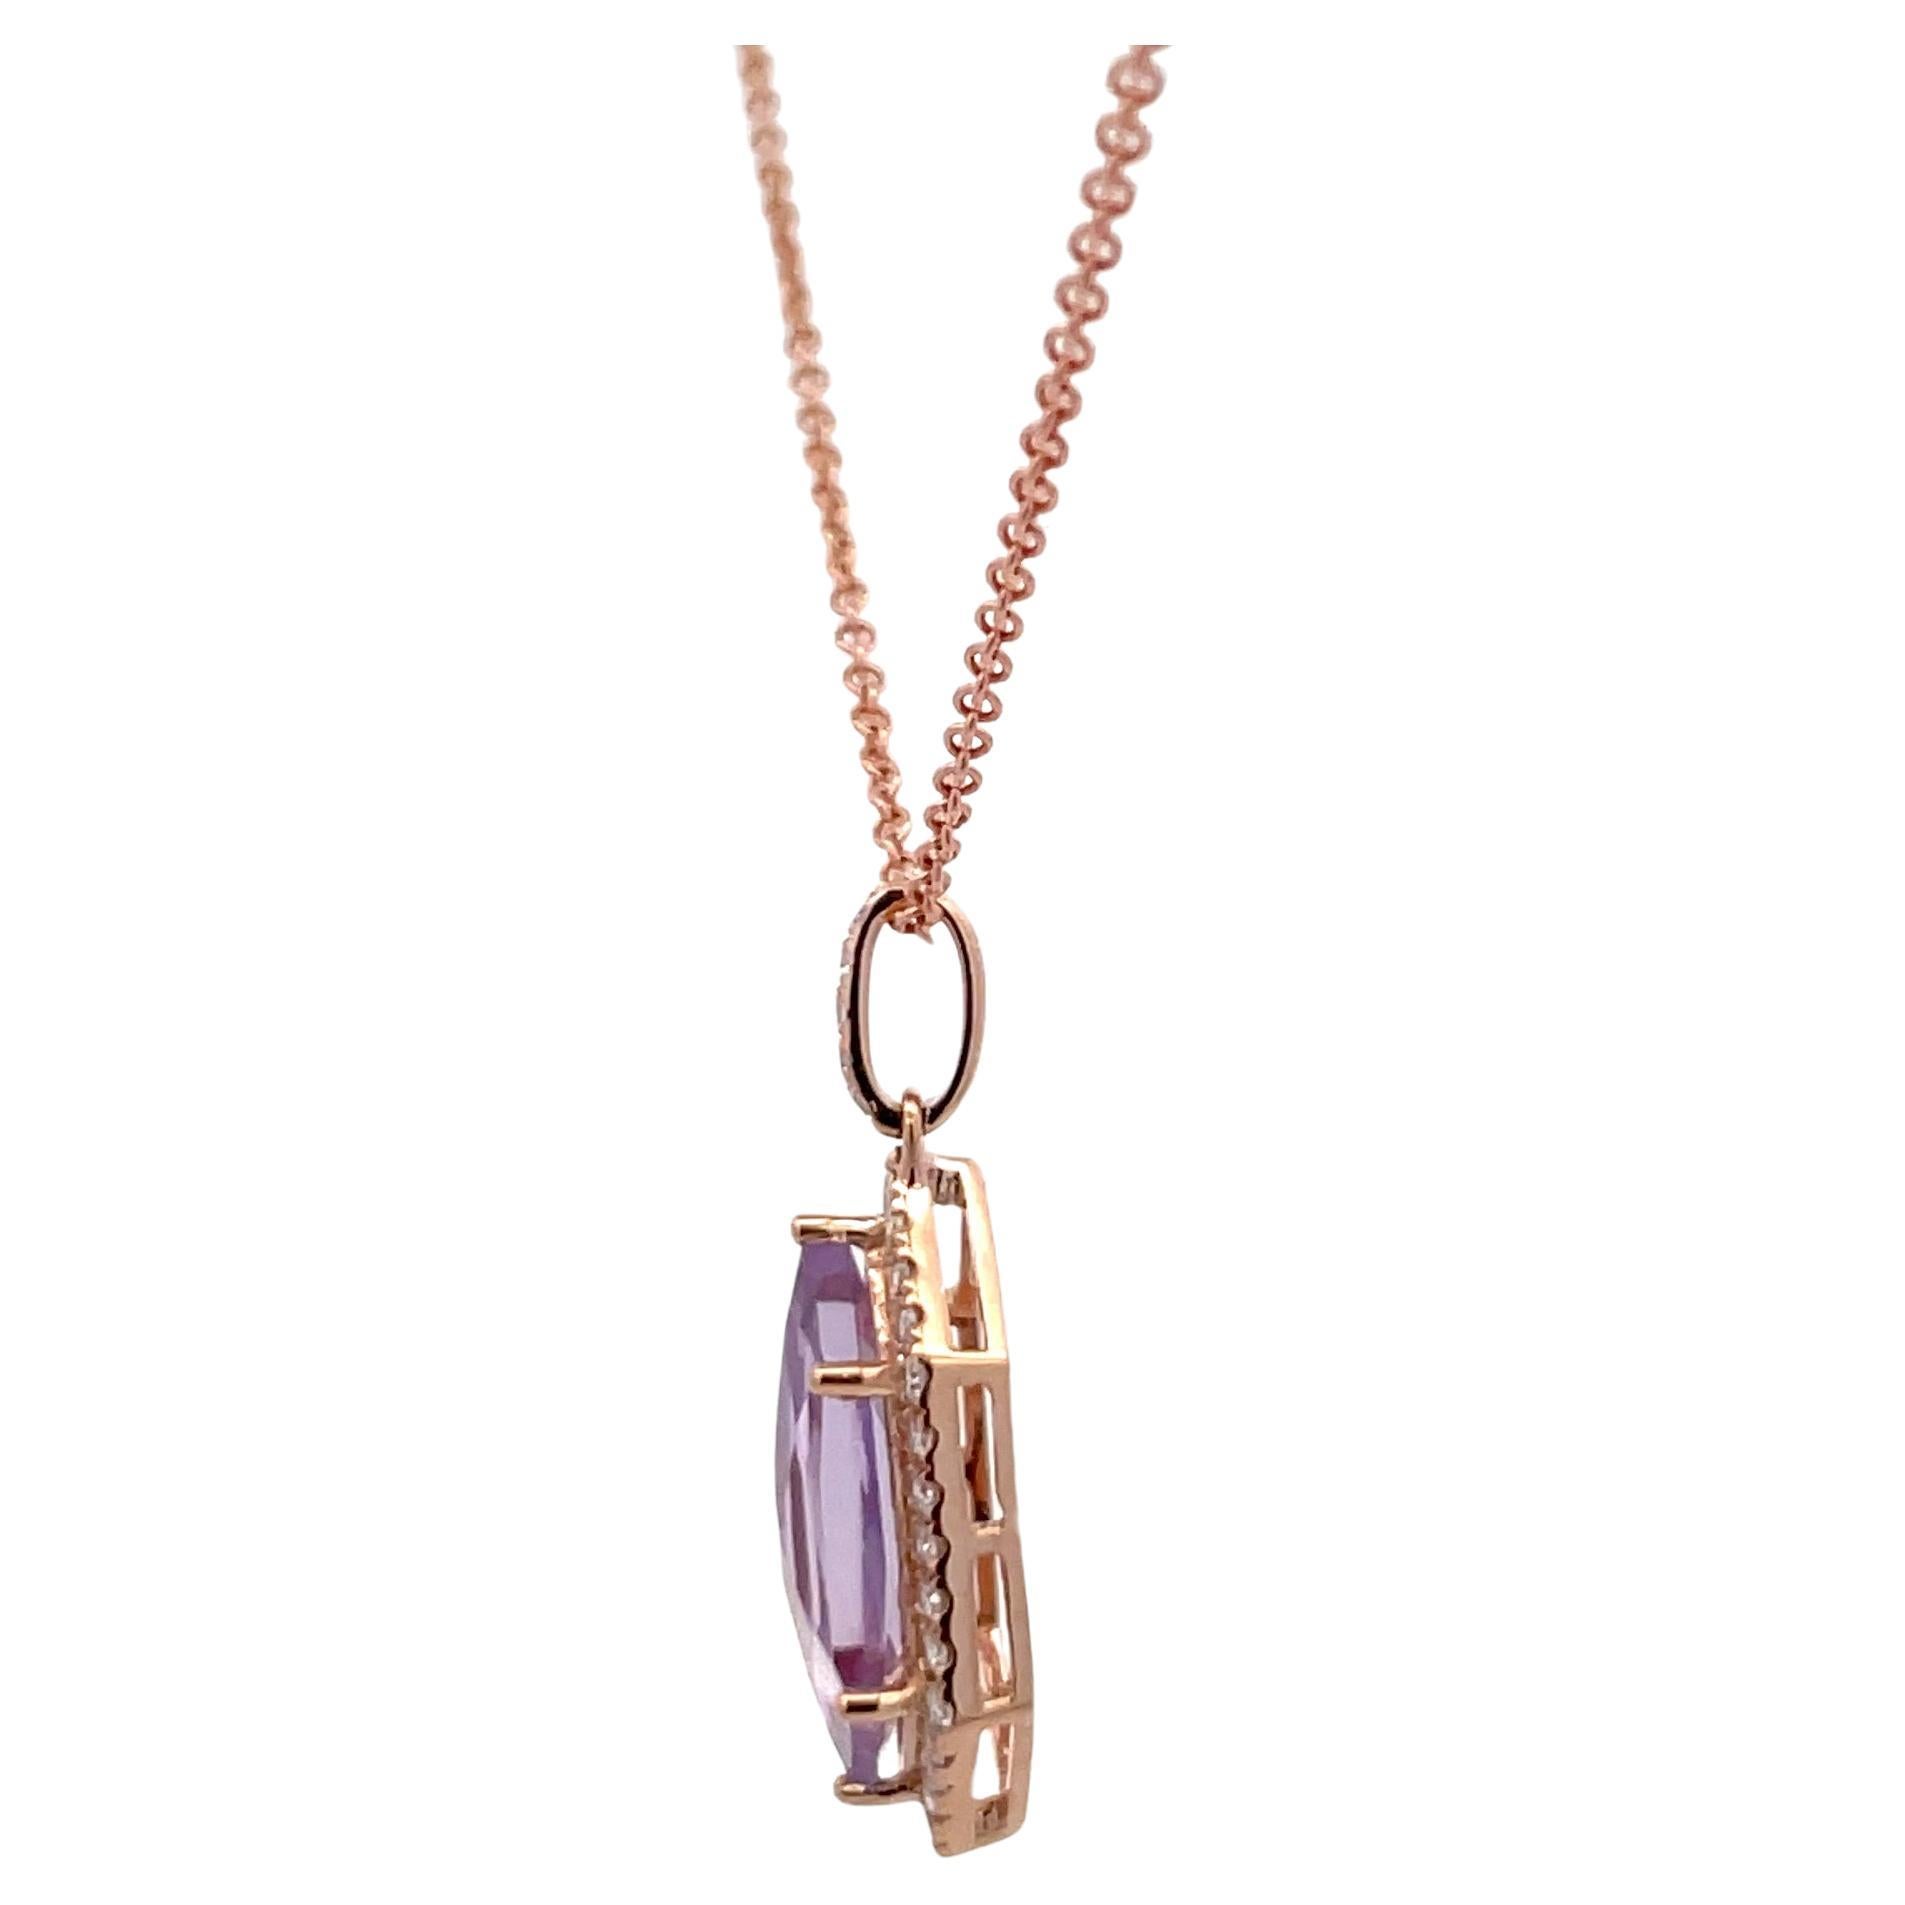 Hexagon shape Rose De France Amethyst weighing 2.57 carats flanked with 33 round brilliants weighing 0.31 carats in 14 karat rose gold. 
Amethyst 
16 MM *6.1 MM

Pendant without bail
19.5 MM * 8.8 MM